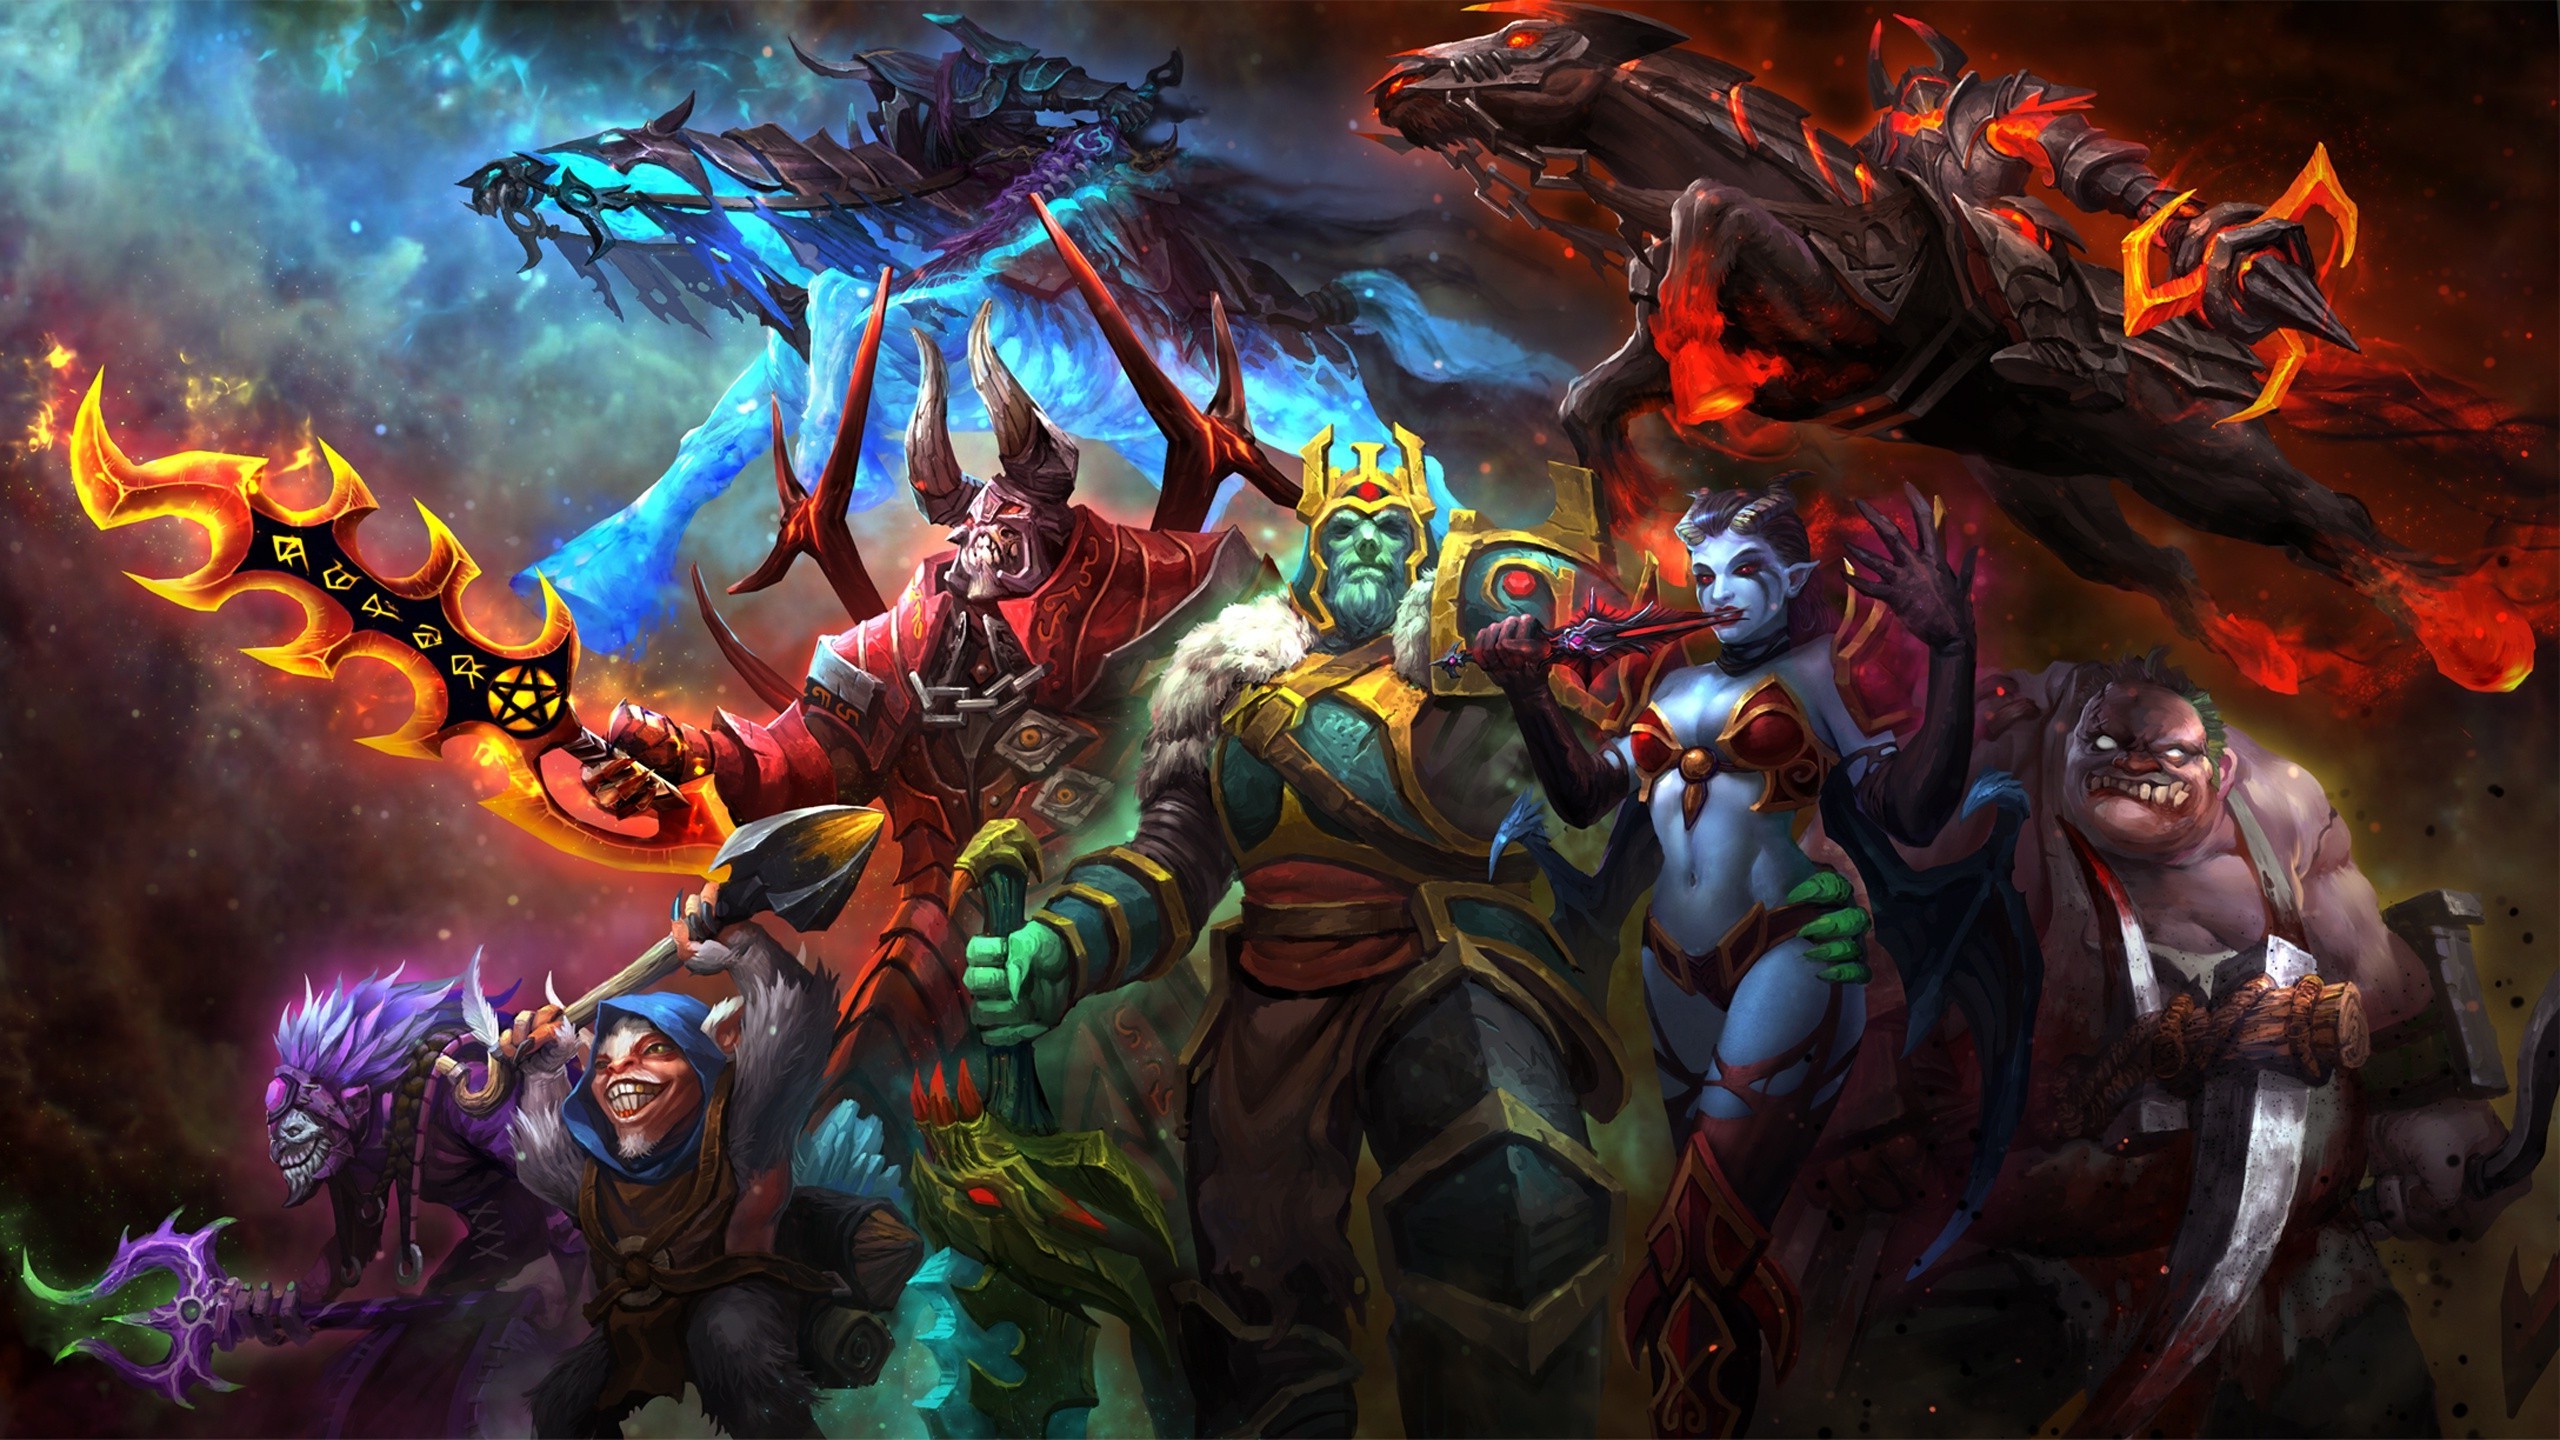 Defense Of The Ancient, Dota, Dota 2, Valve, Valve Corporation, Heroes, Video Games, Wraith King, Pudge, Queen Of Pain, Meepo, Dazzle, Cahos Knight, Abaddon Wallpaper